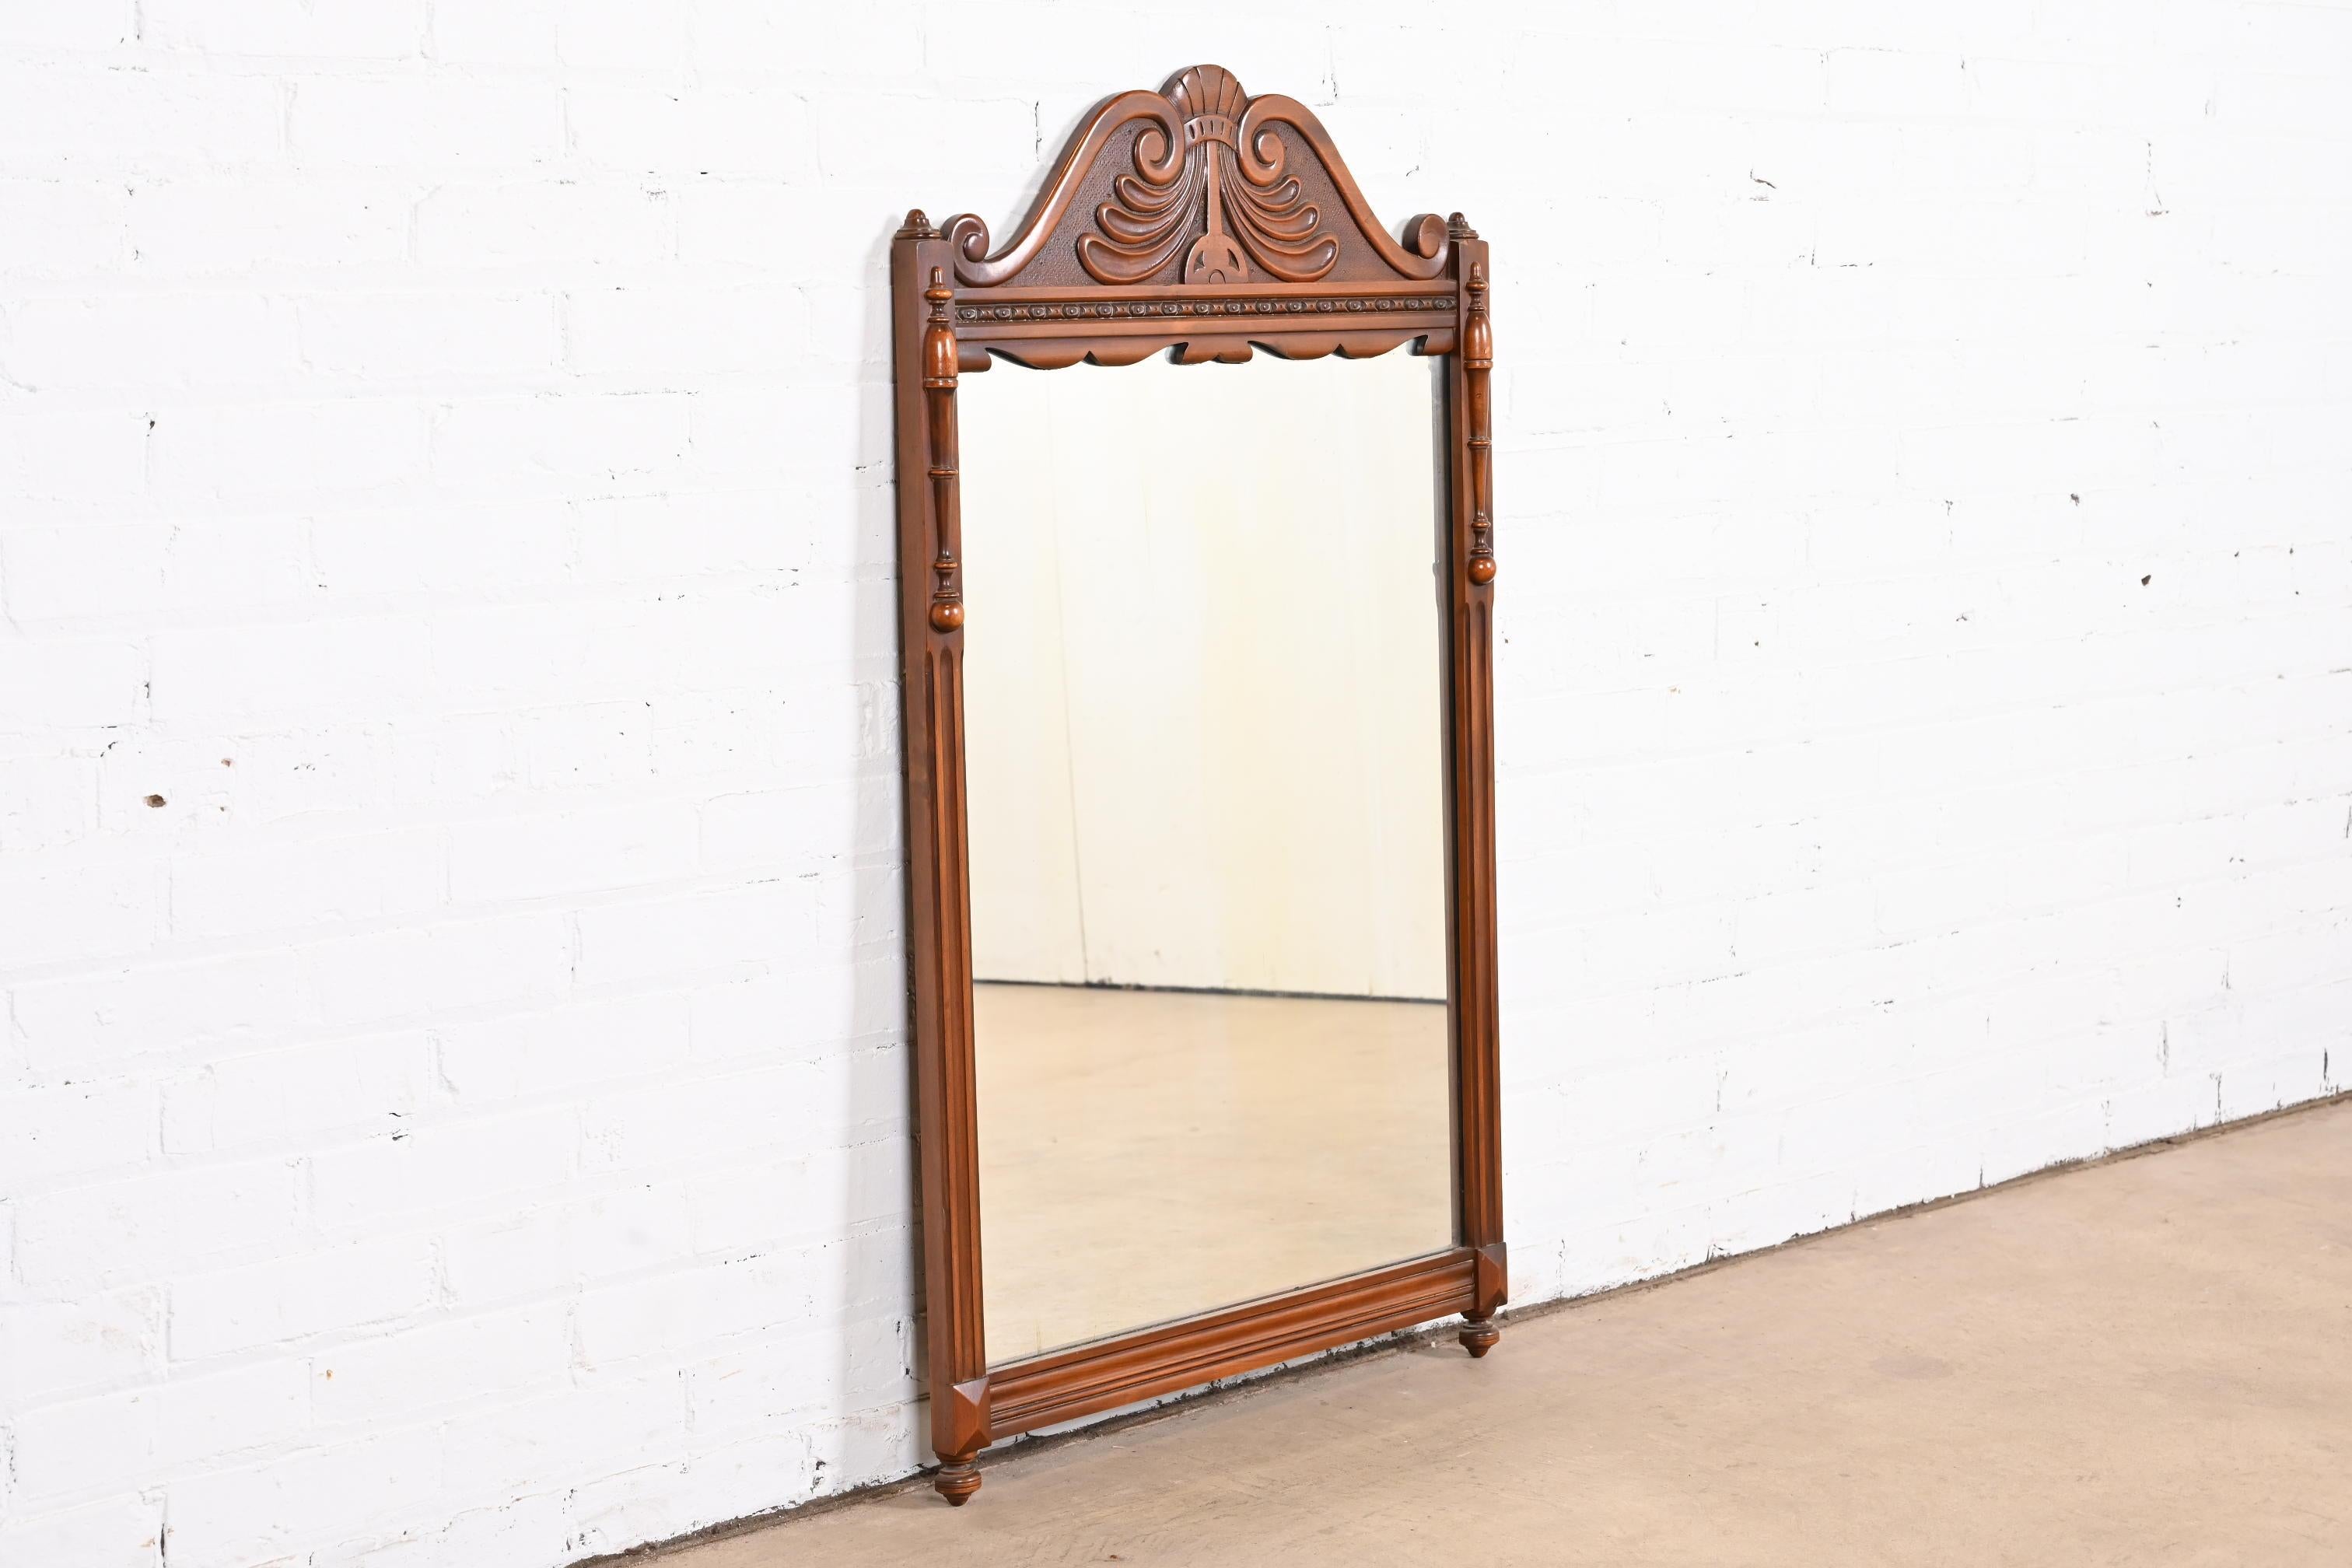 American French Art Deco Carved Walnut Wall Mirror by Landstrom, Circa 1940s For Sale